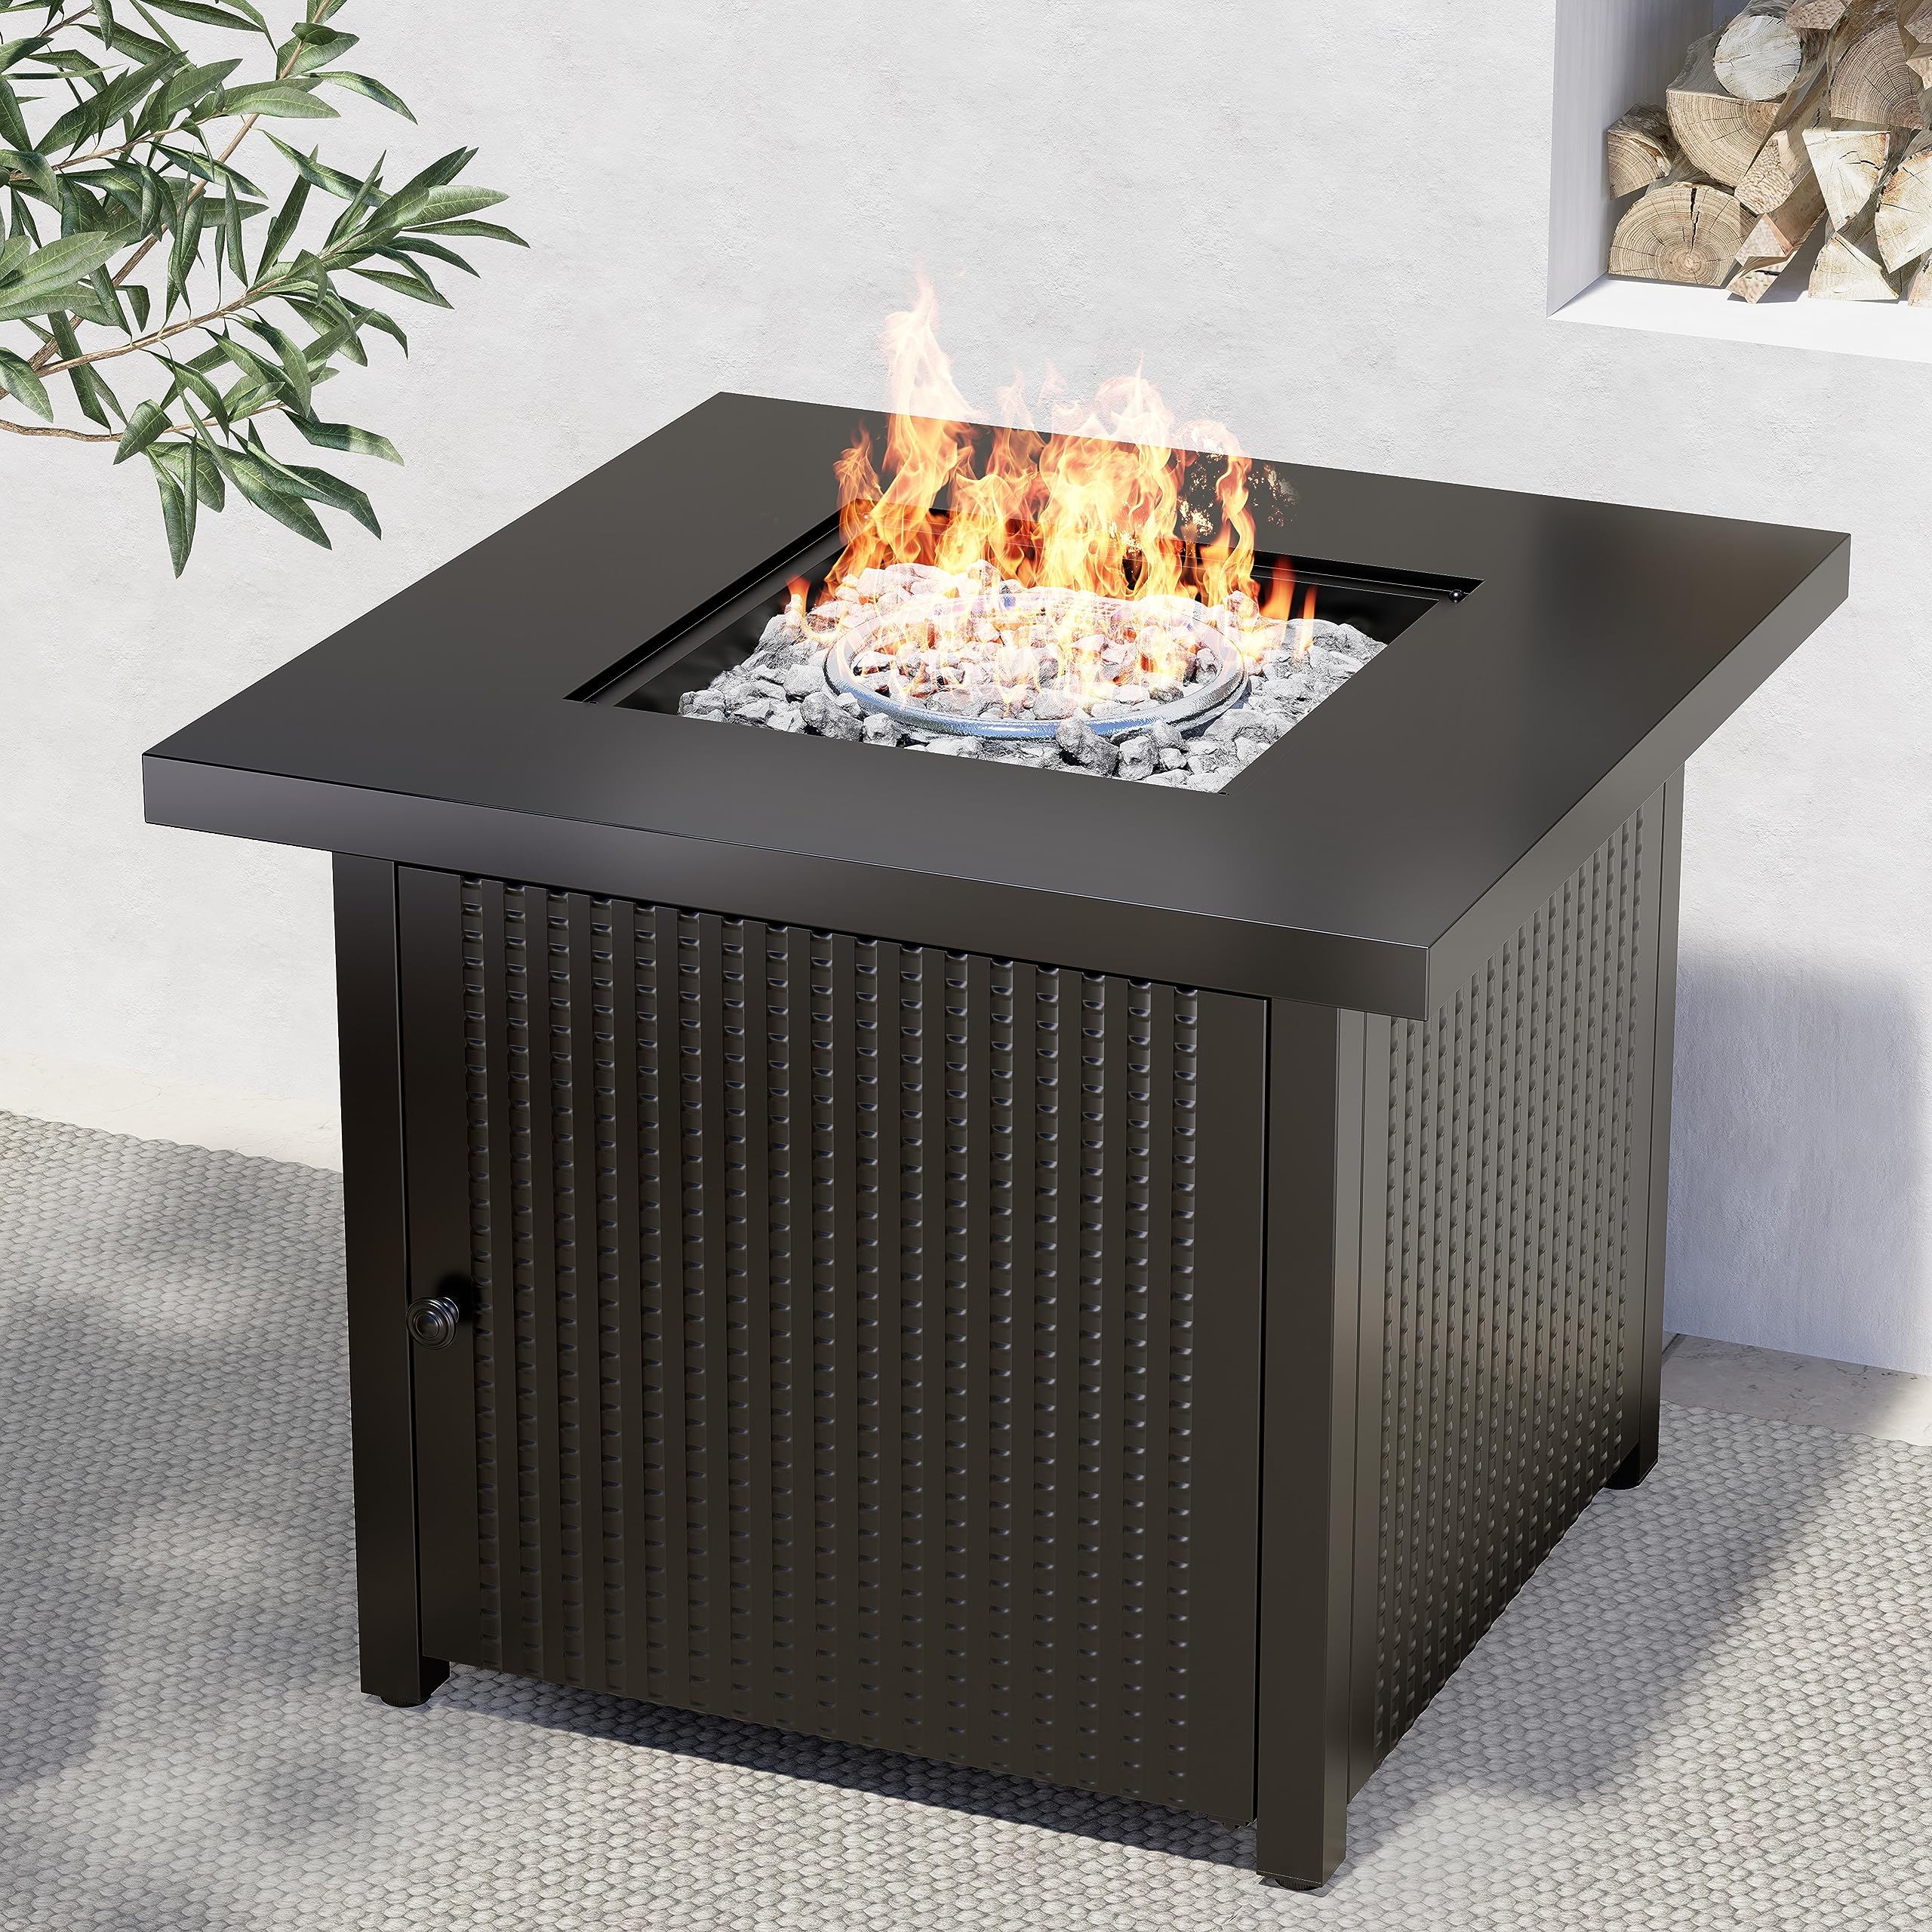 Outdoor Gas Fire Pit Table 30-Inch Square Propane Gas Fire Pit CSA Safety Approved 50000BTU with Steel Tabletop, Removable Lid, and Lava Rock